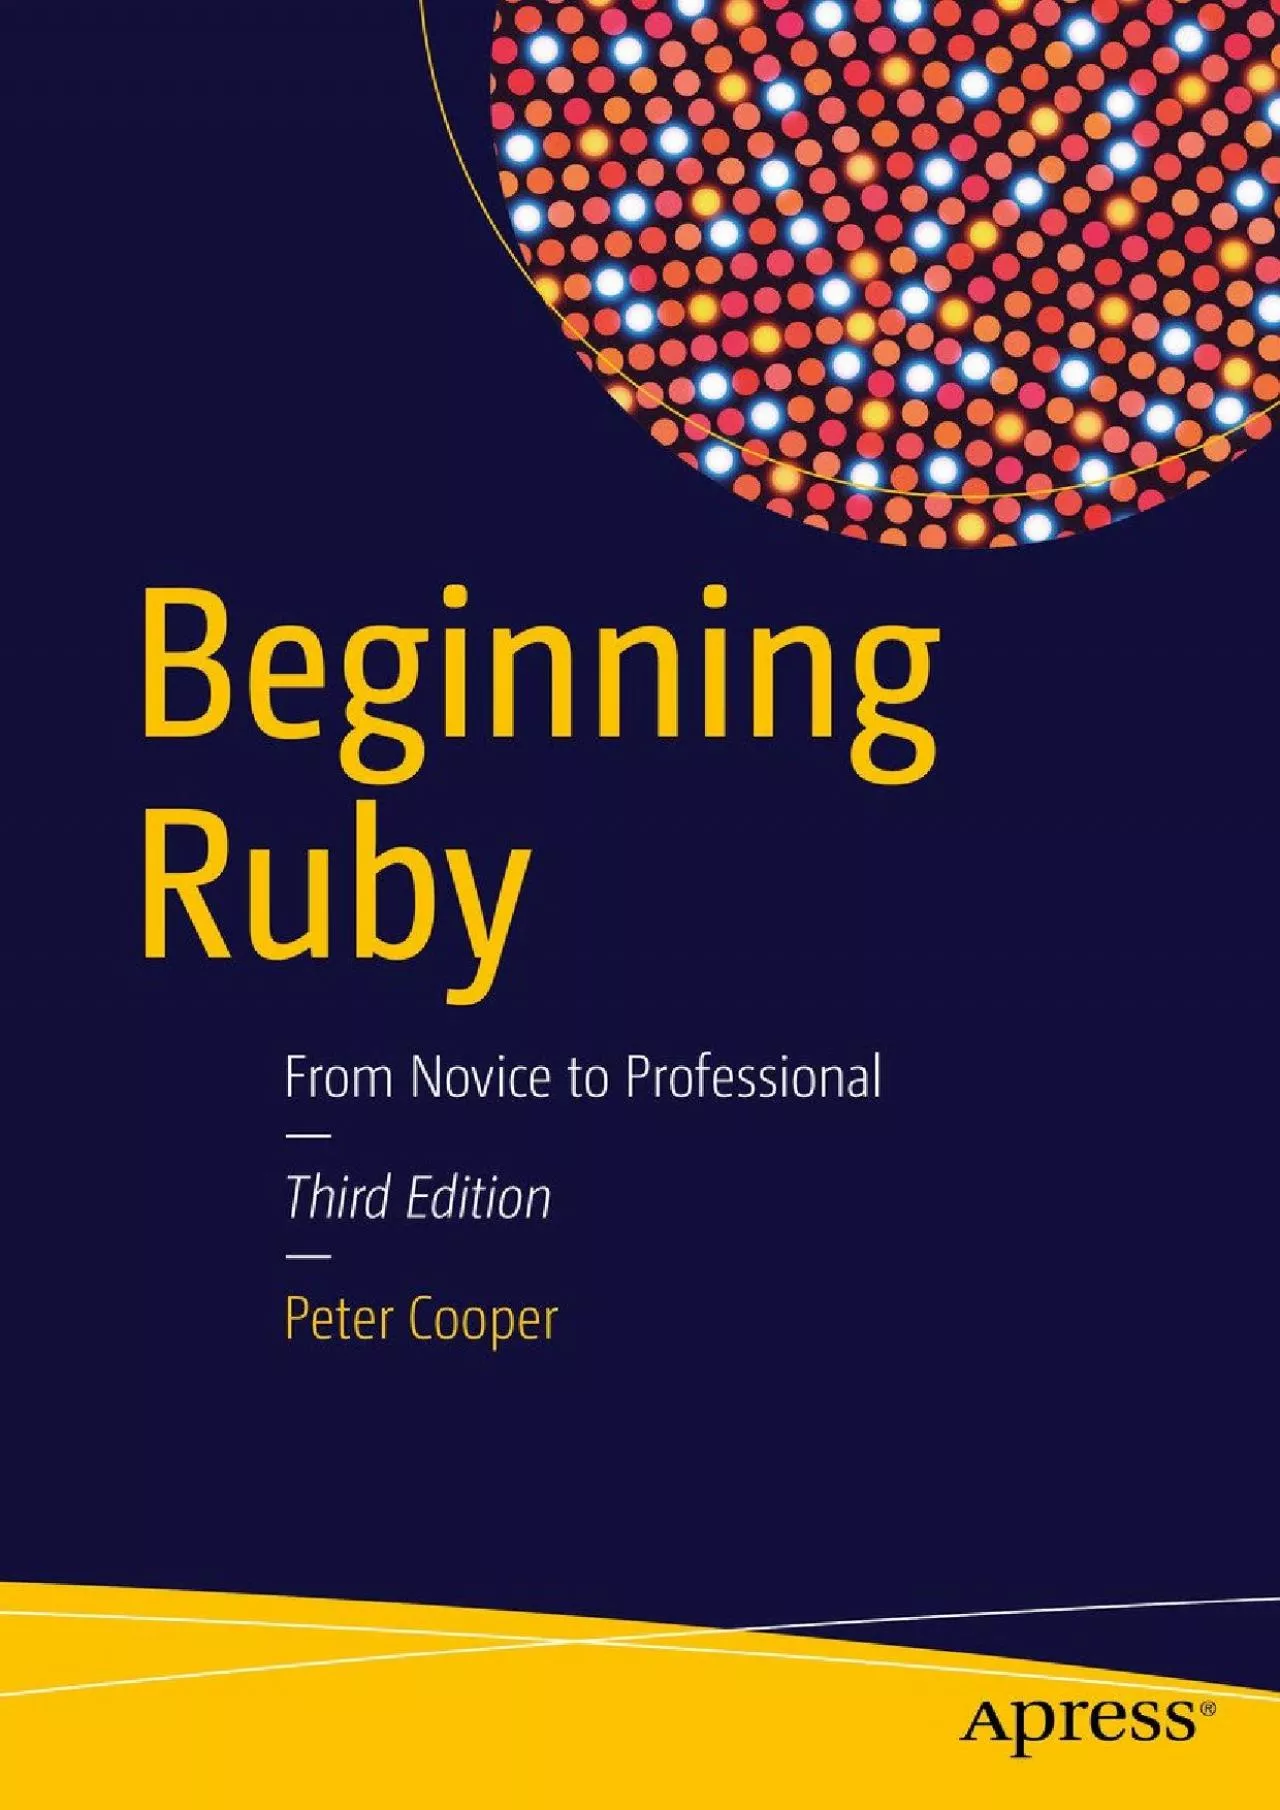 [READING BOOK]-Beginning Ruby: From Novice to Professional